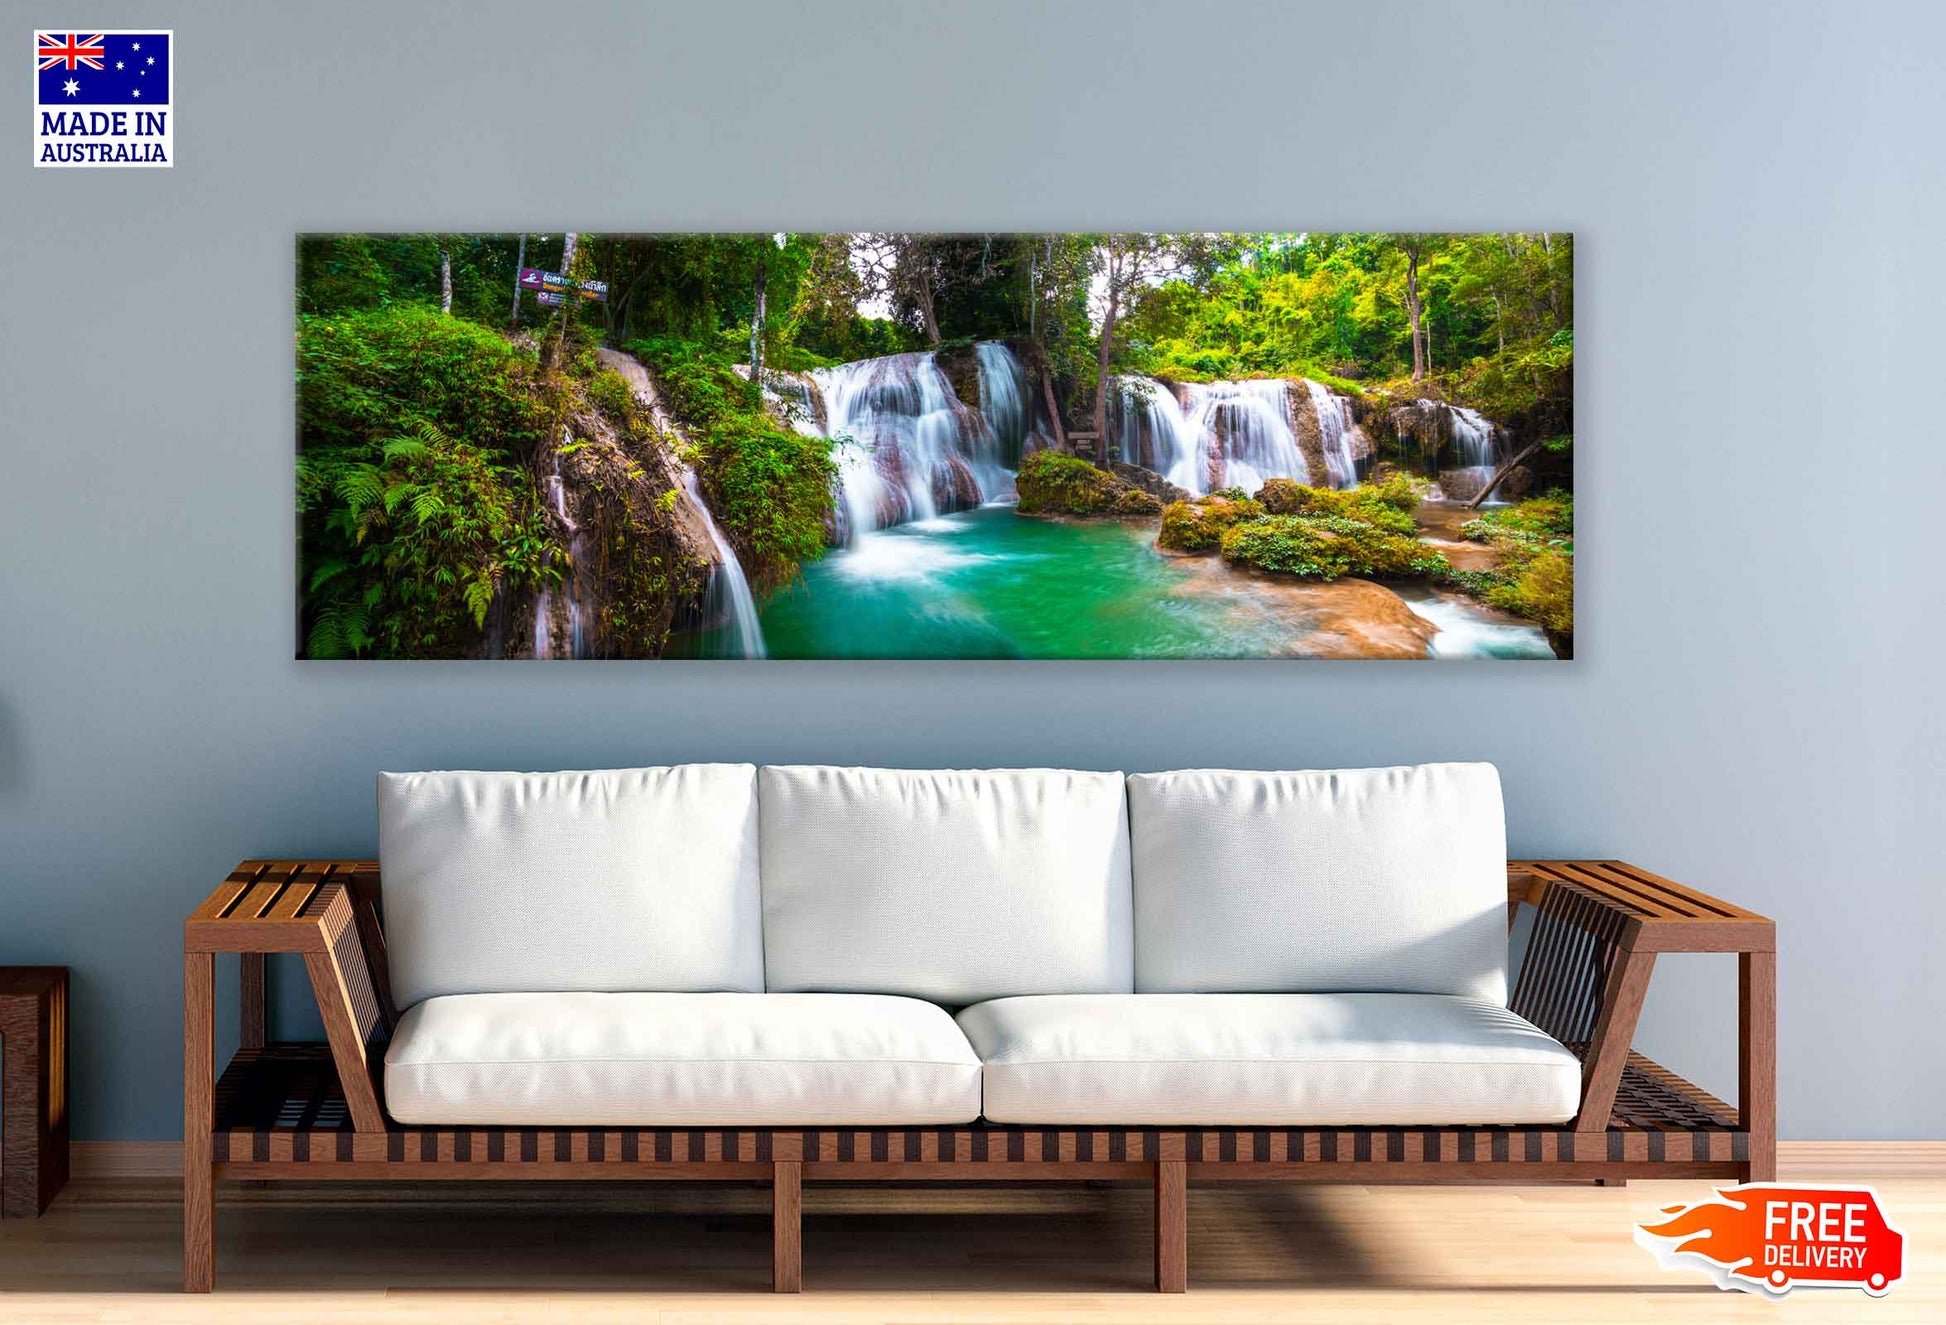 Panoramic Canvas Than Sawan Falls in Forest High Quality 100% Australian Made Wall Canvas Print Ready to Hang